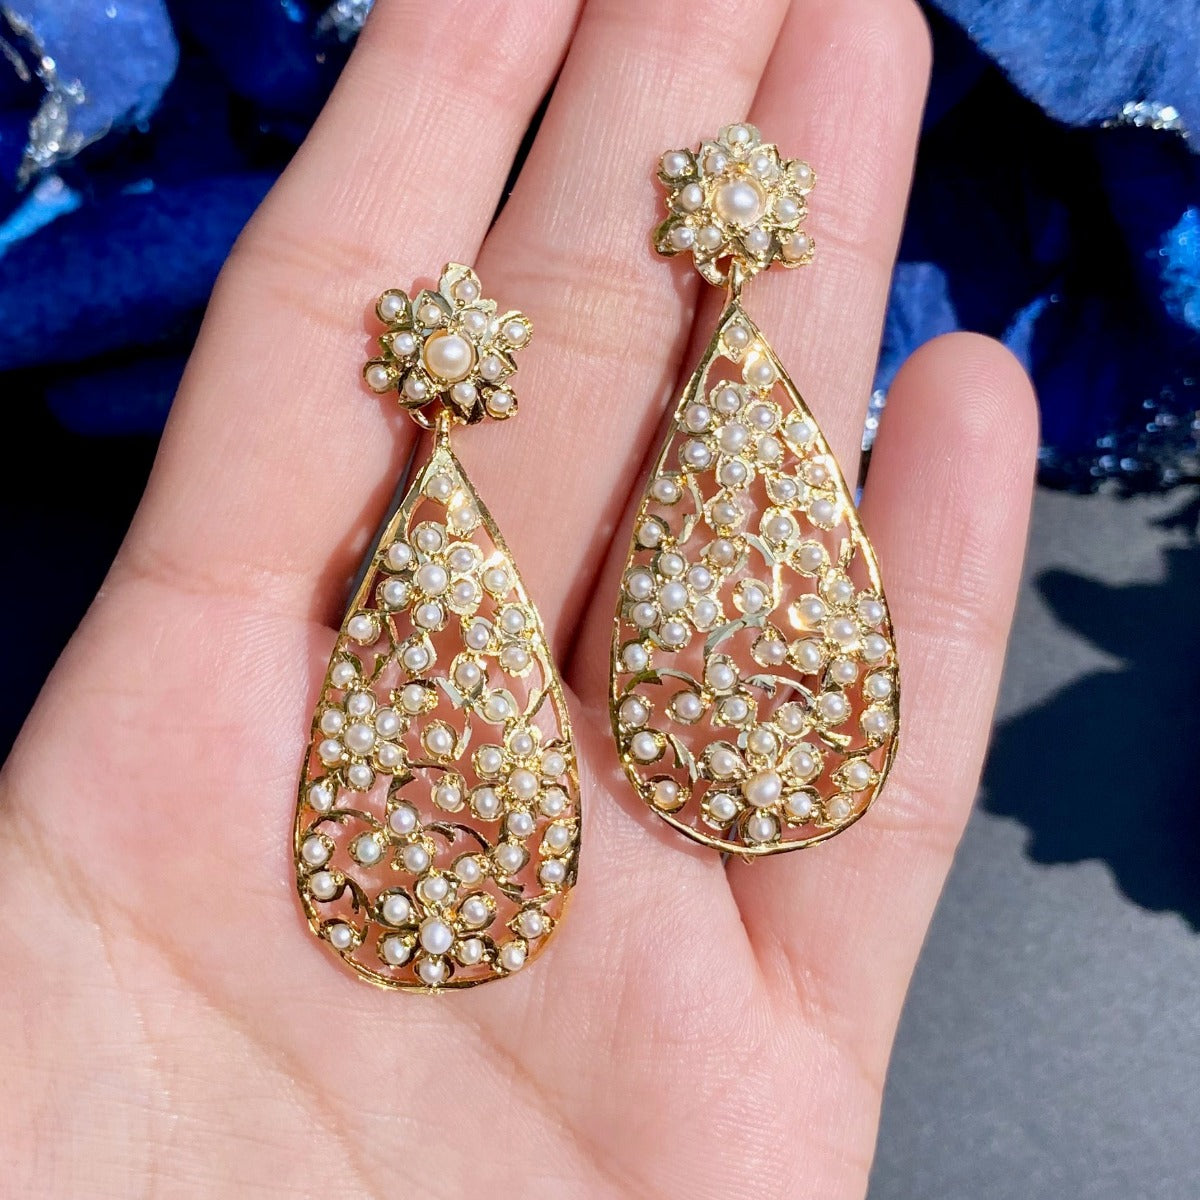 pearl earrings on gold polished silver